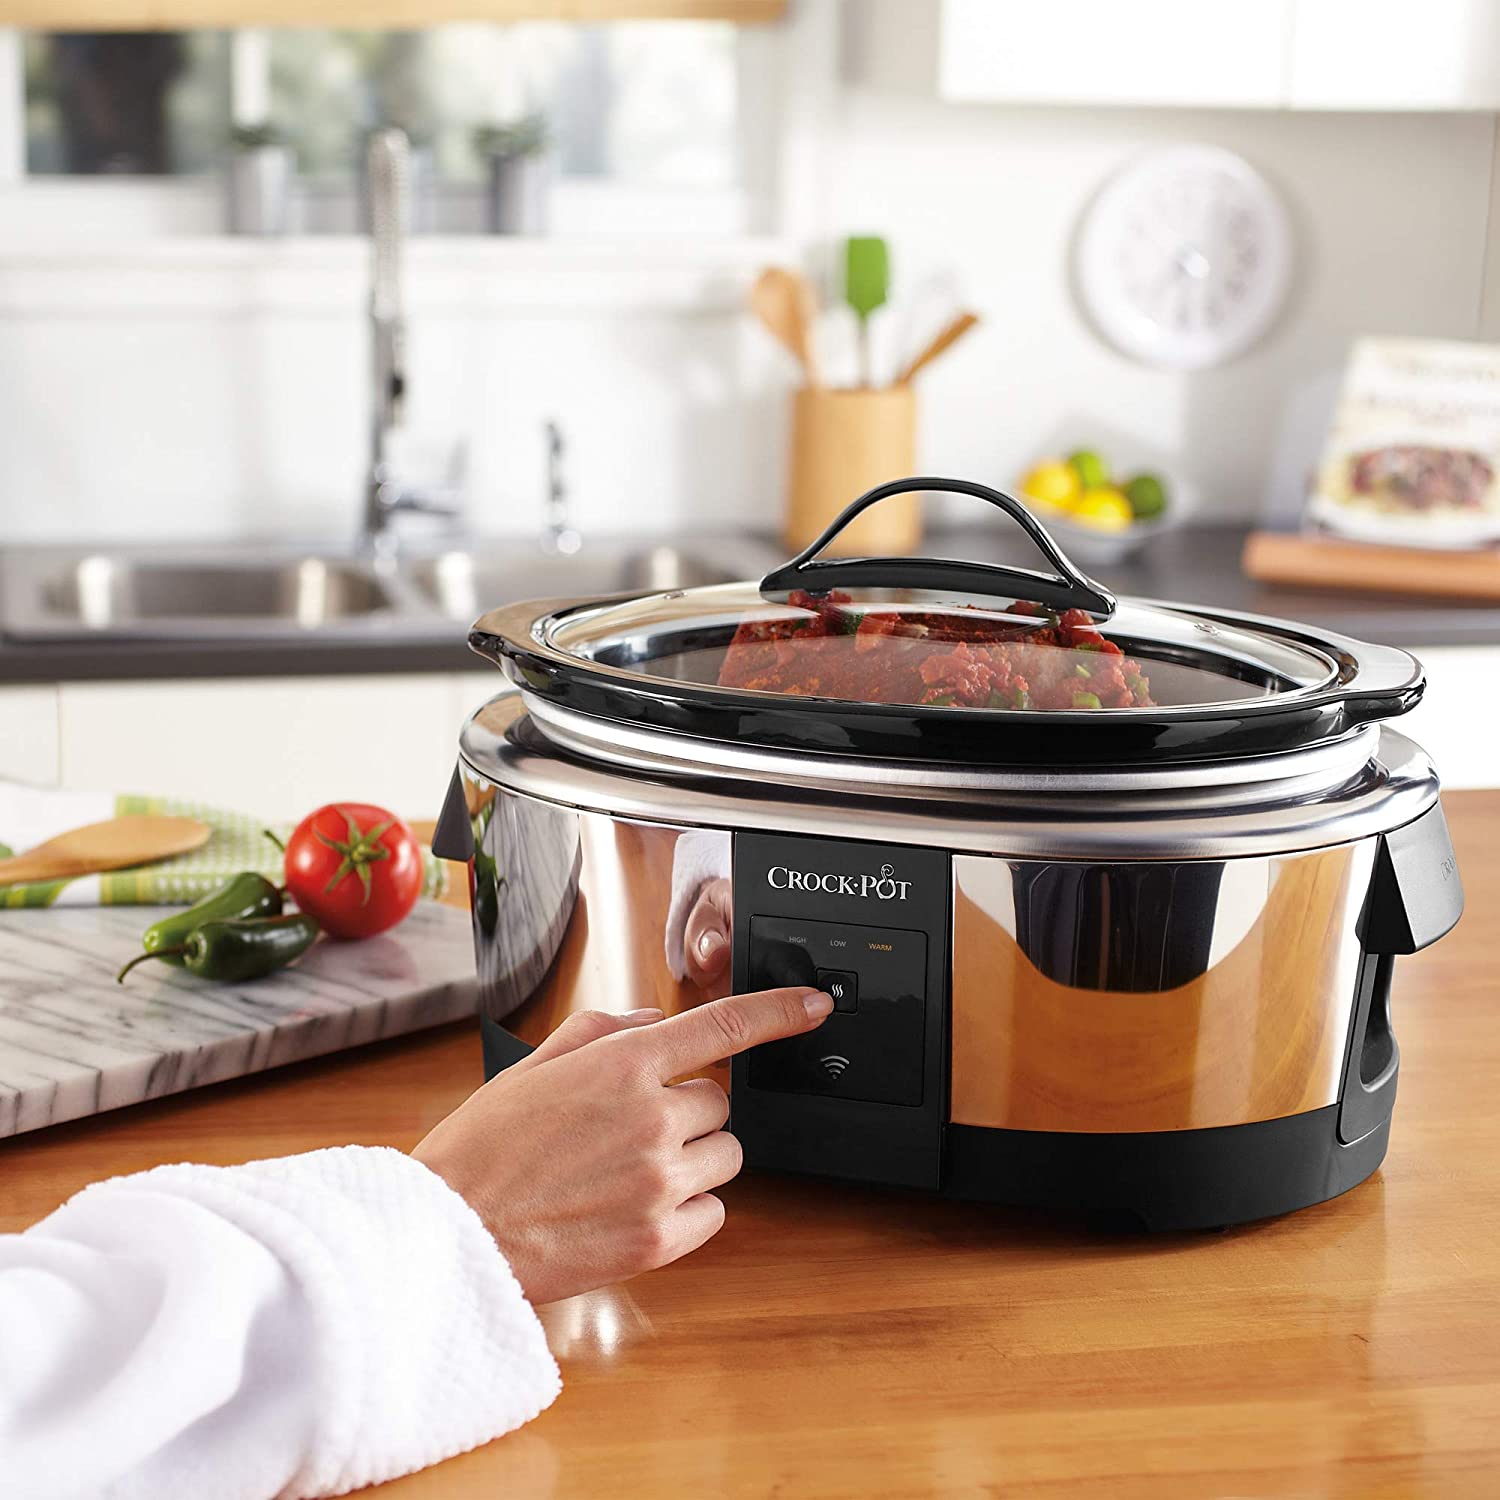 https://bigbigmart.com/wp-content/uploads/2023/03/Crock-Pot-Slow-Cooker-Works-with-Alexa-6-Quart-Programmable-Stainless-Steel-2139005-A-Certified-for-Humans-Device7.jpg